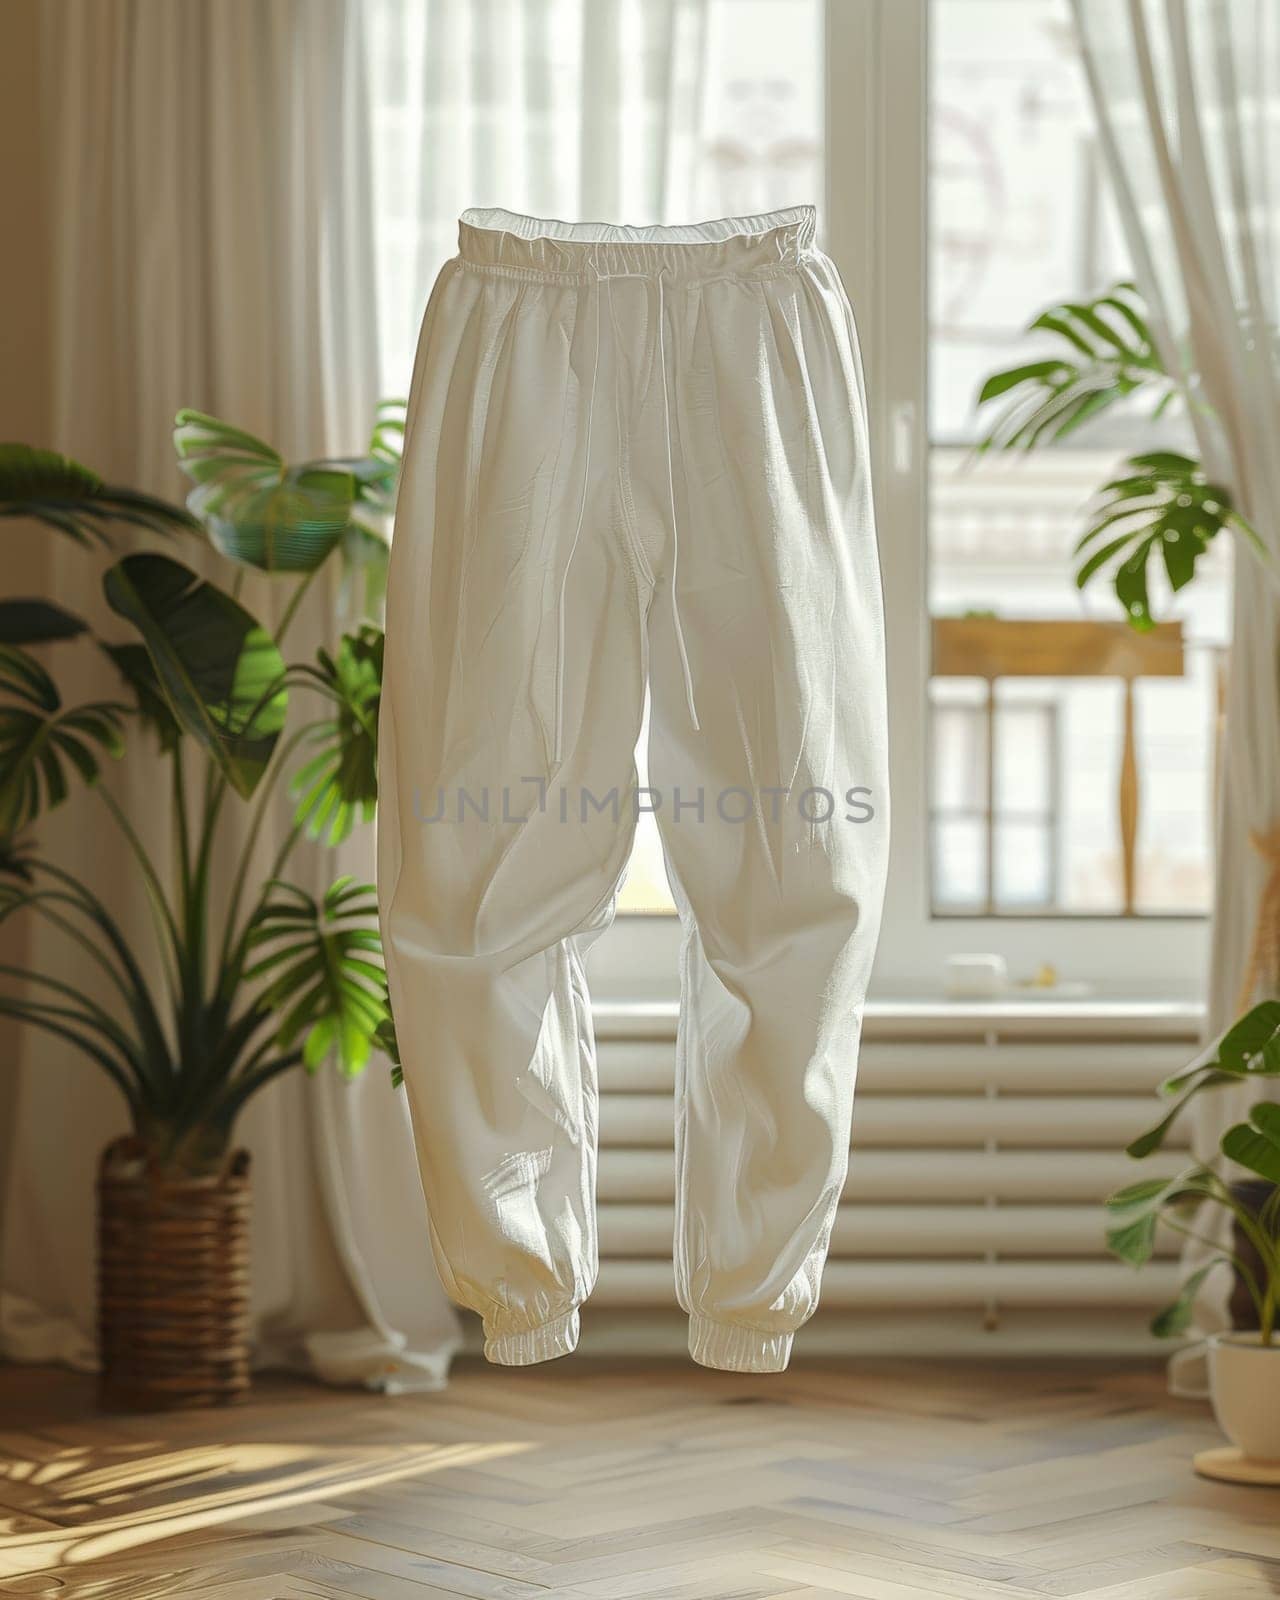 A pair of white pants is hanging in a room with a window and a potted plant by itchaznong